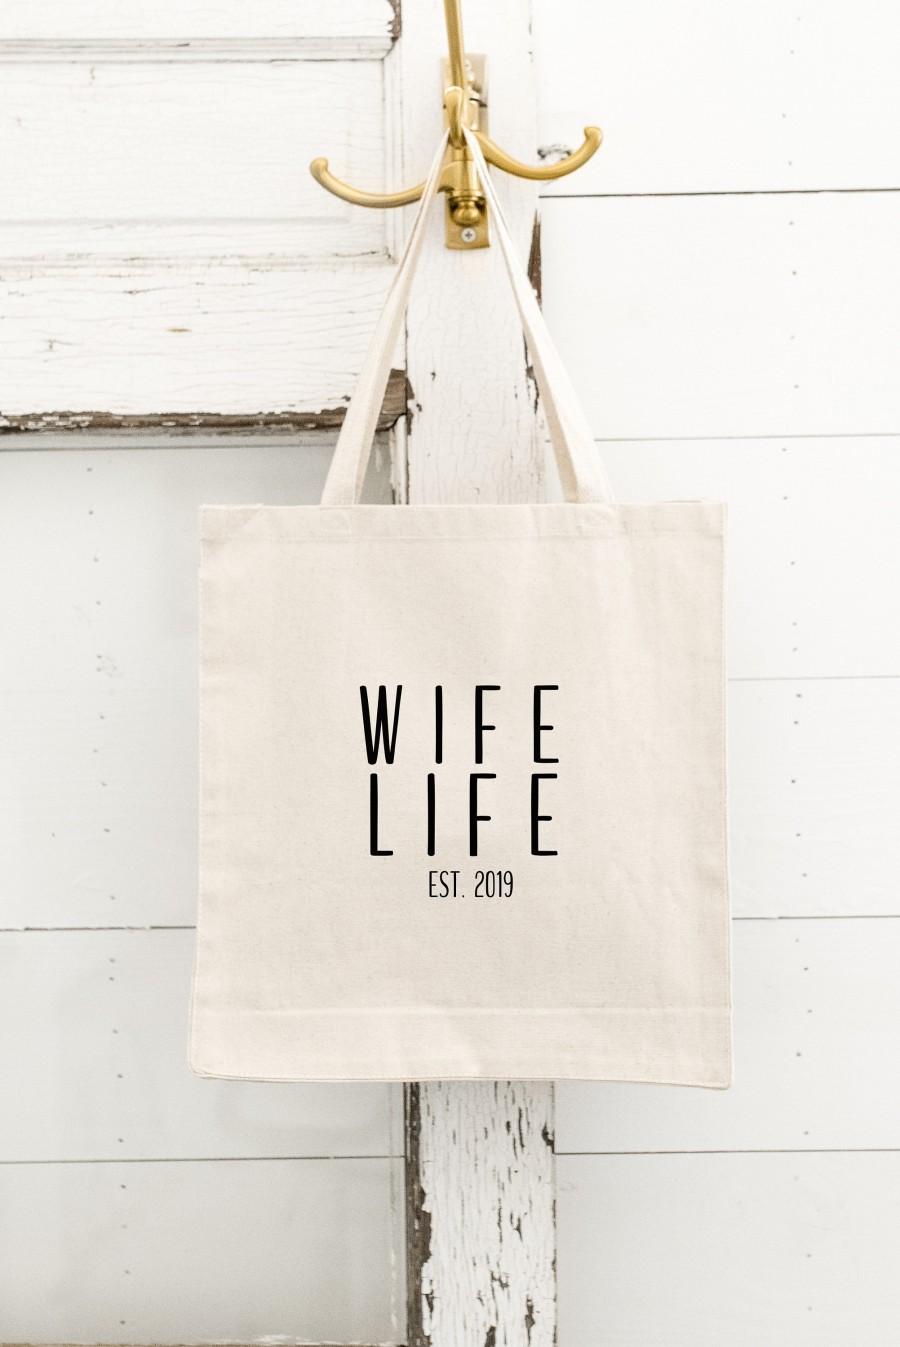 Hochzeit - Wife Life Tote - Honeymoon Tote - Bride Gift - Wedding Tote - Bachelorette Party Tote - Personalized Tote - Mrs. Tote- Wife Life